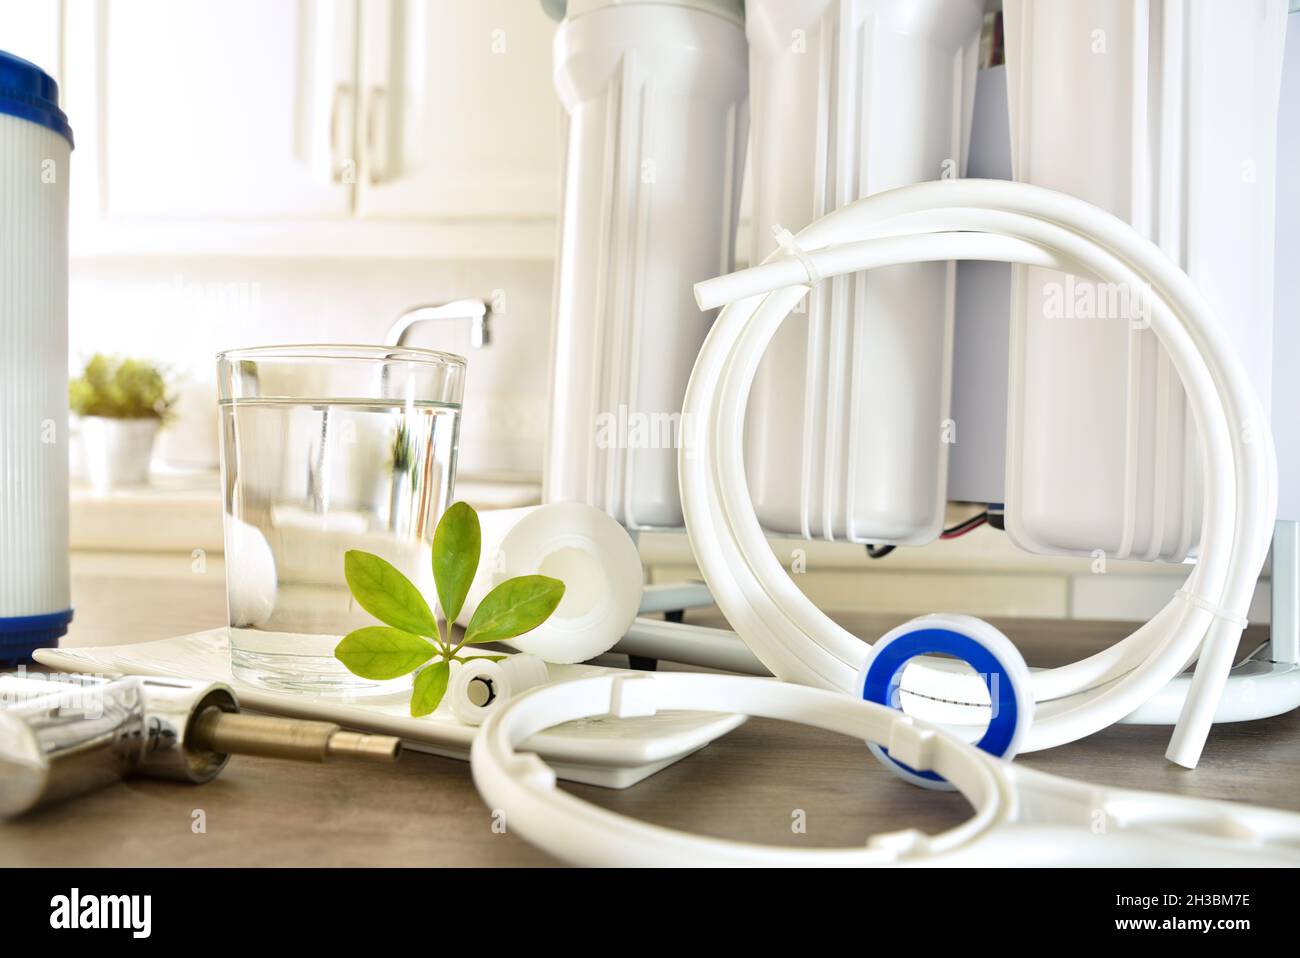 Equipment for mounting domestic reverse osmosis equipment on kitchen table. Front view. Horizontal composition. Stock Photo